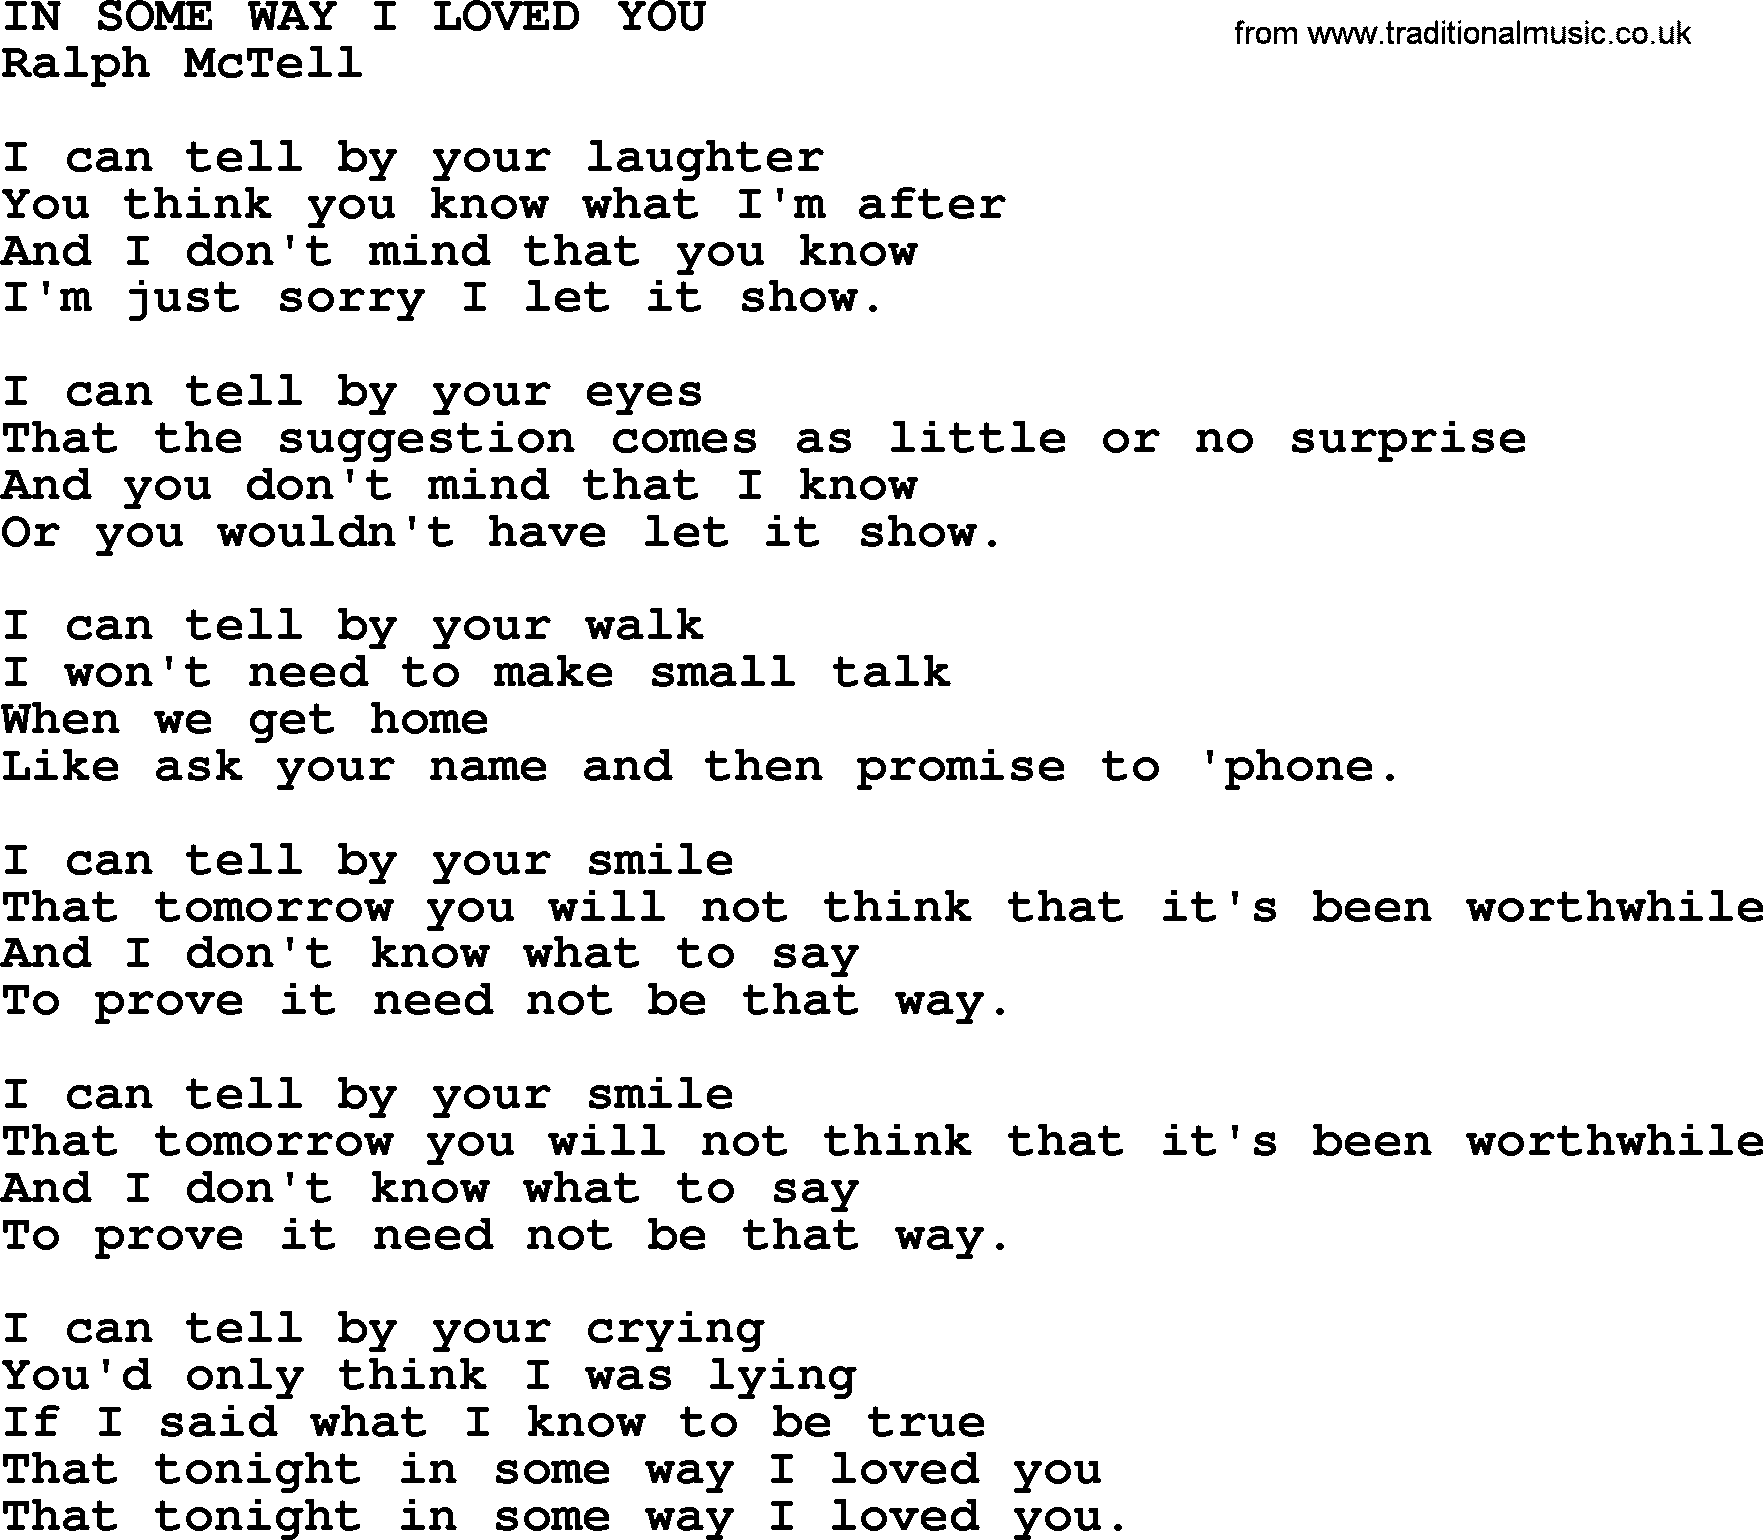 Ralph McTell Song: In Some Way I Loved You, lyrics